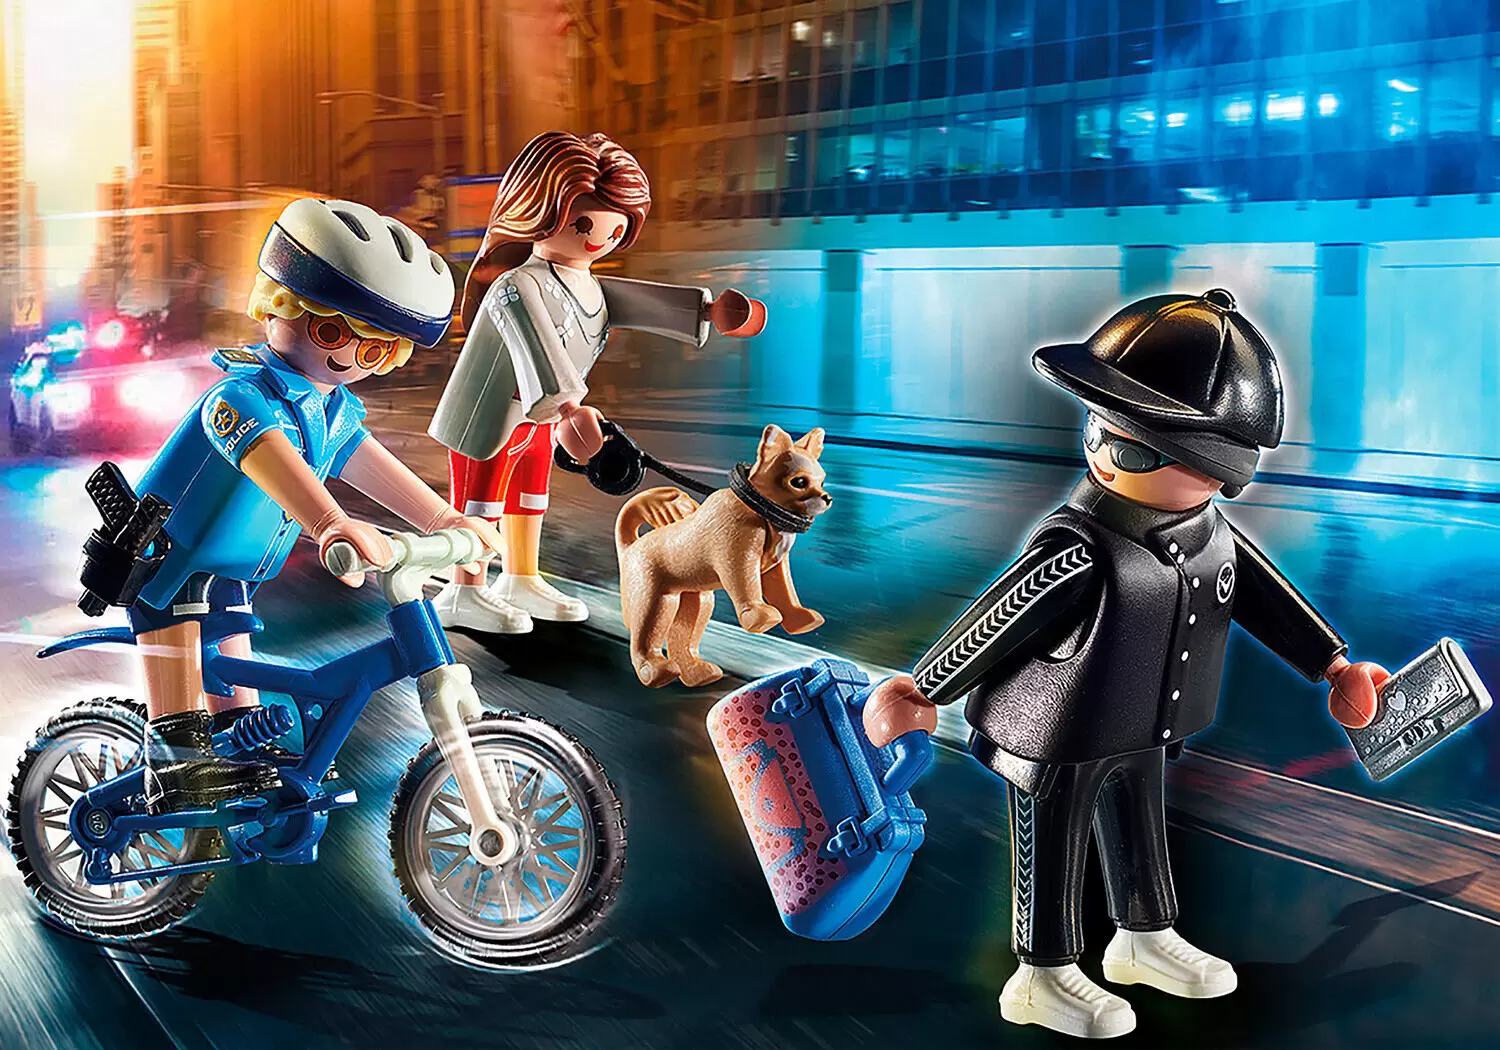 Police Playmobil - Police bicycle after a thief